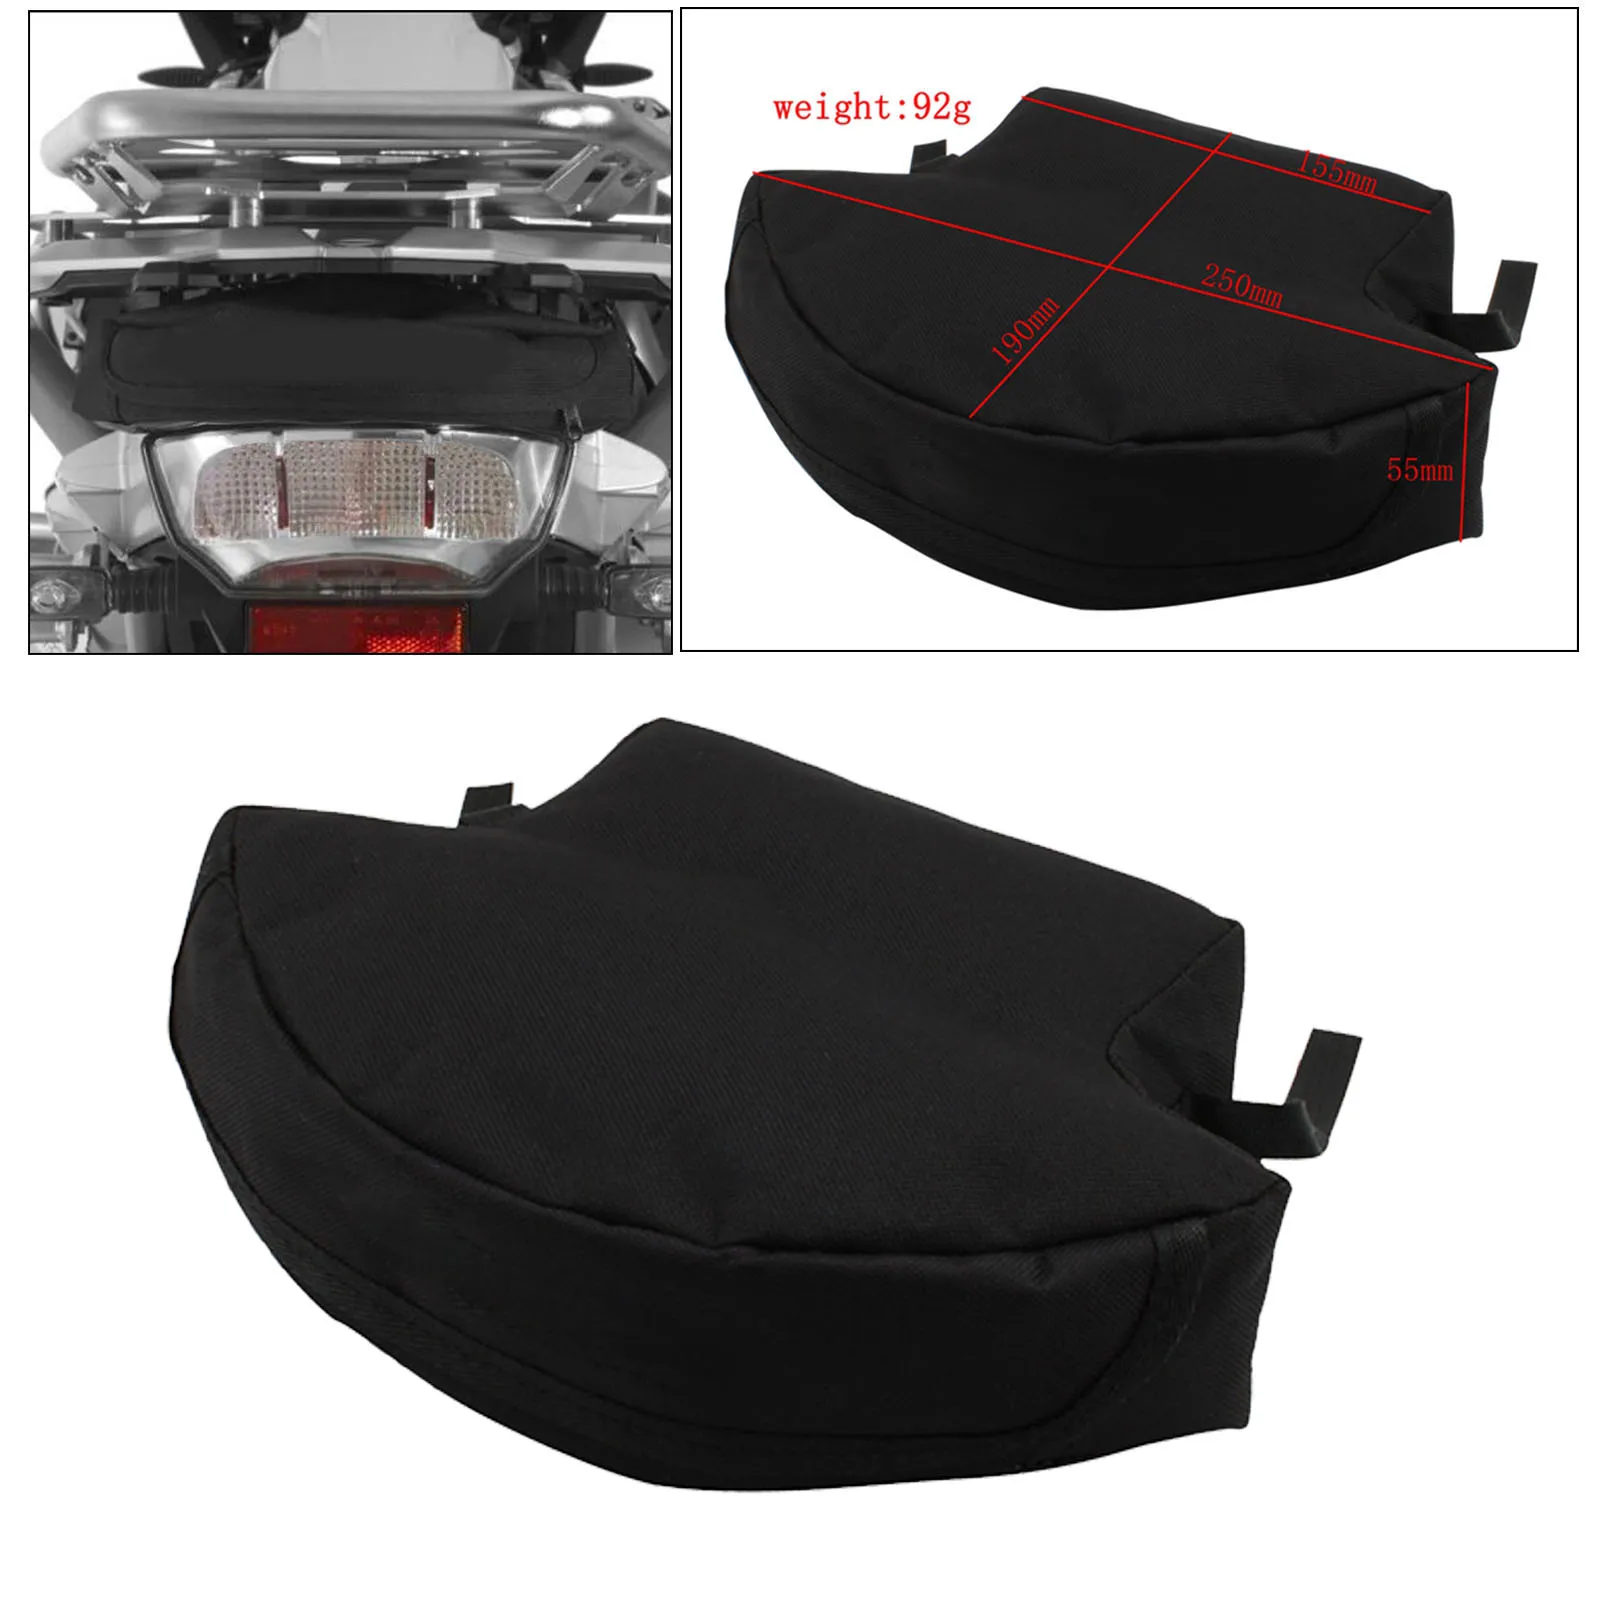 Gap Tool Storage Bag Luggage Rack Rear Luggage Holder Waterproof Seat Tail Bag for  R1250GS R1200GS